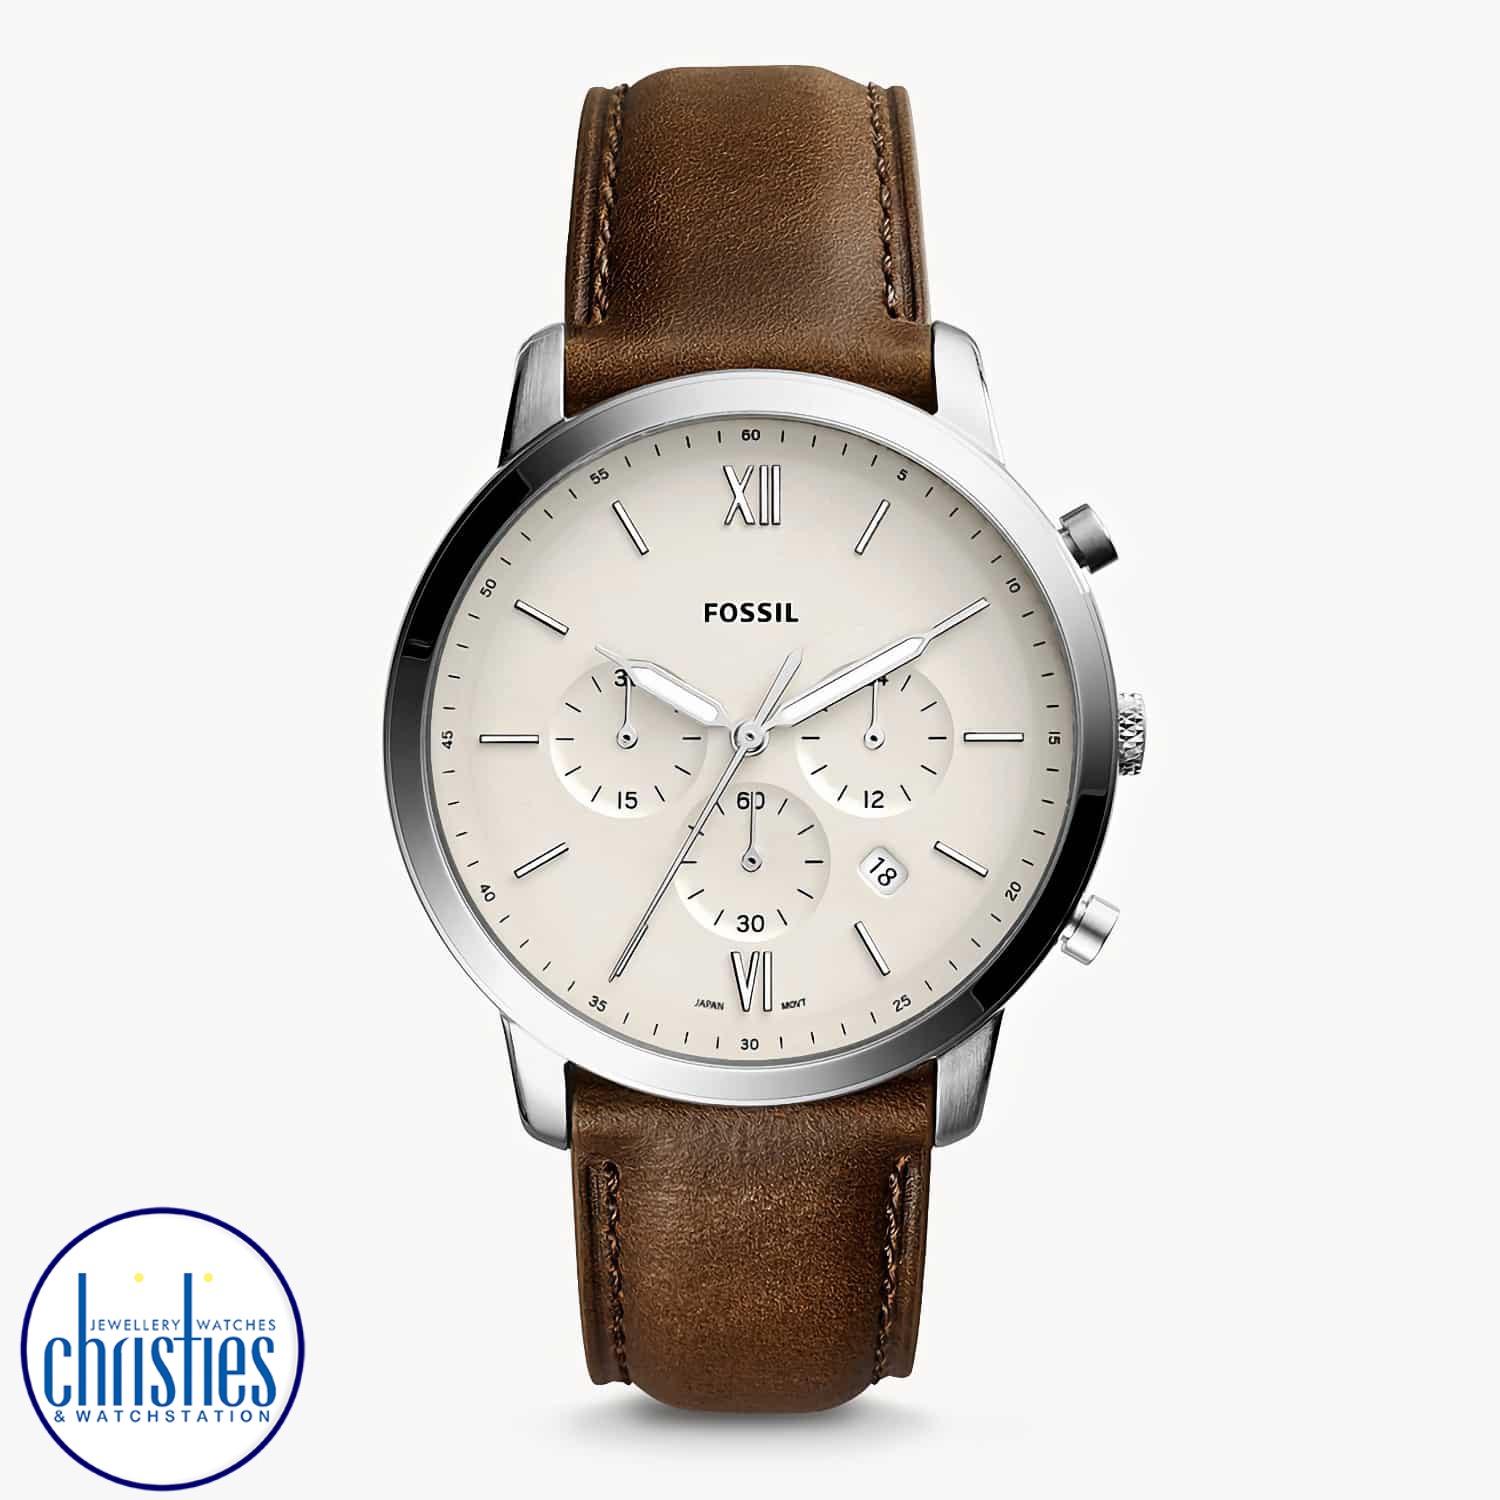 FS5380 Fossil Neutra Chronograph Brown Leather Watch. FS5380 Fossil Neutra Chronograph Brown Leather Watch Afterpay - Split your purchase into 4 instalments - Pay for your purchase over 4 instalments, due every two weeks. You’ll pay your first installment